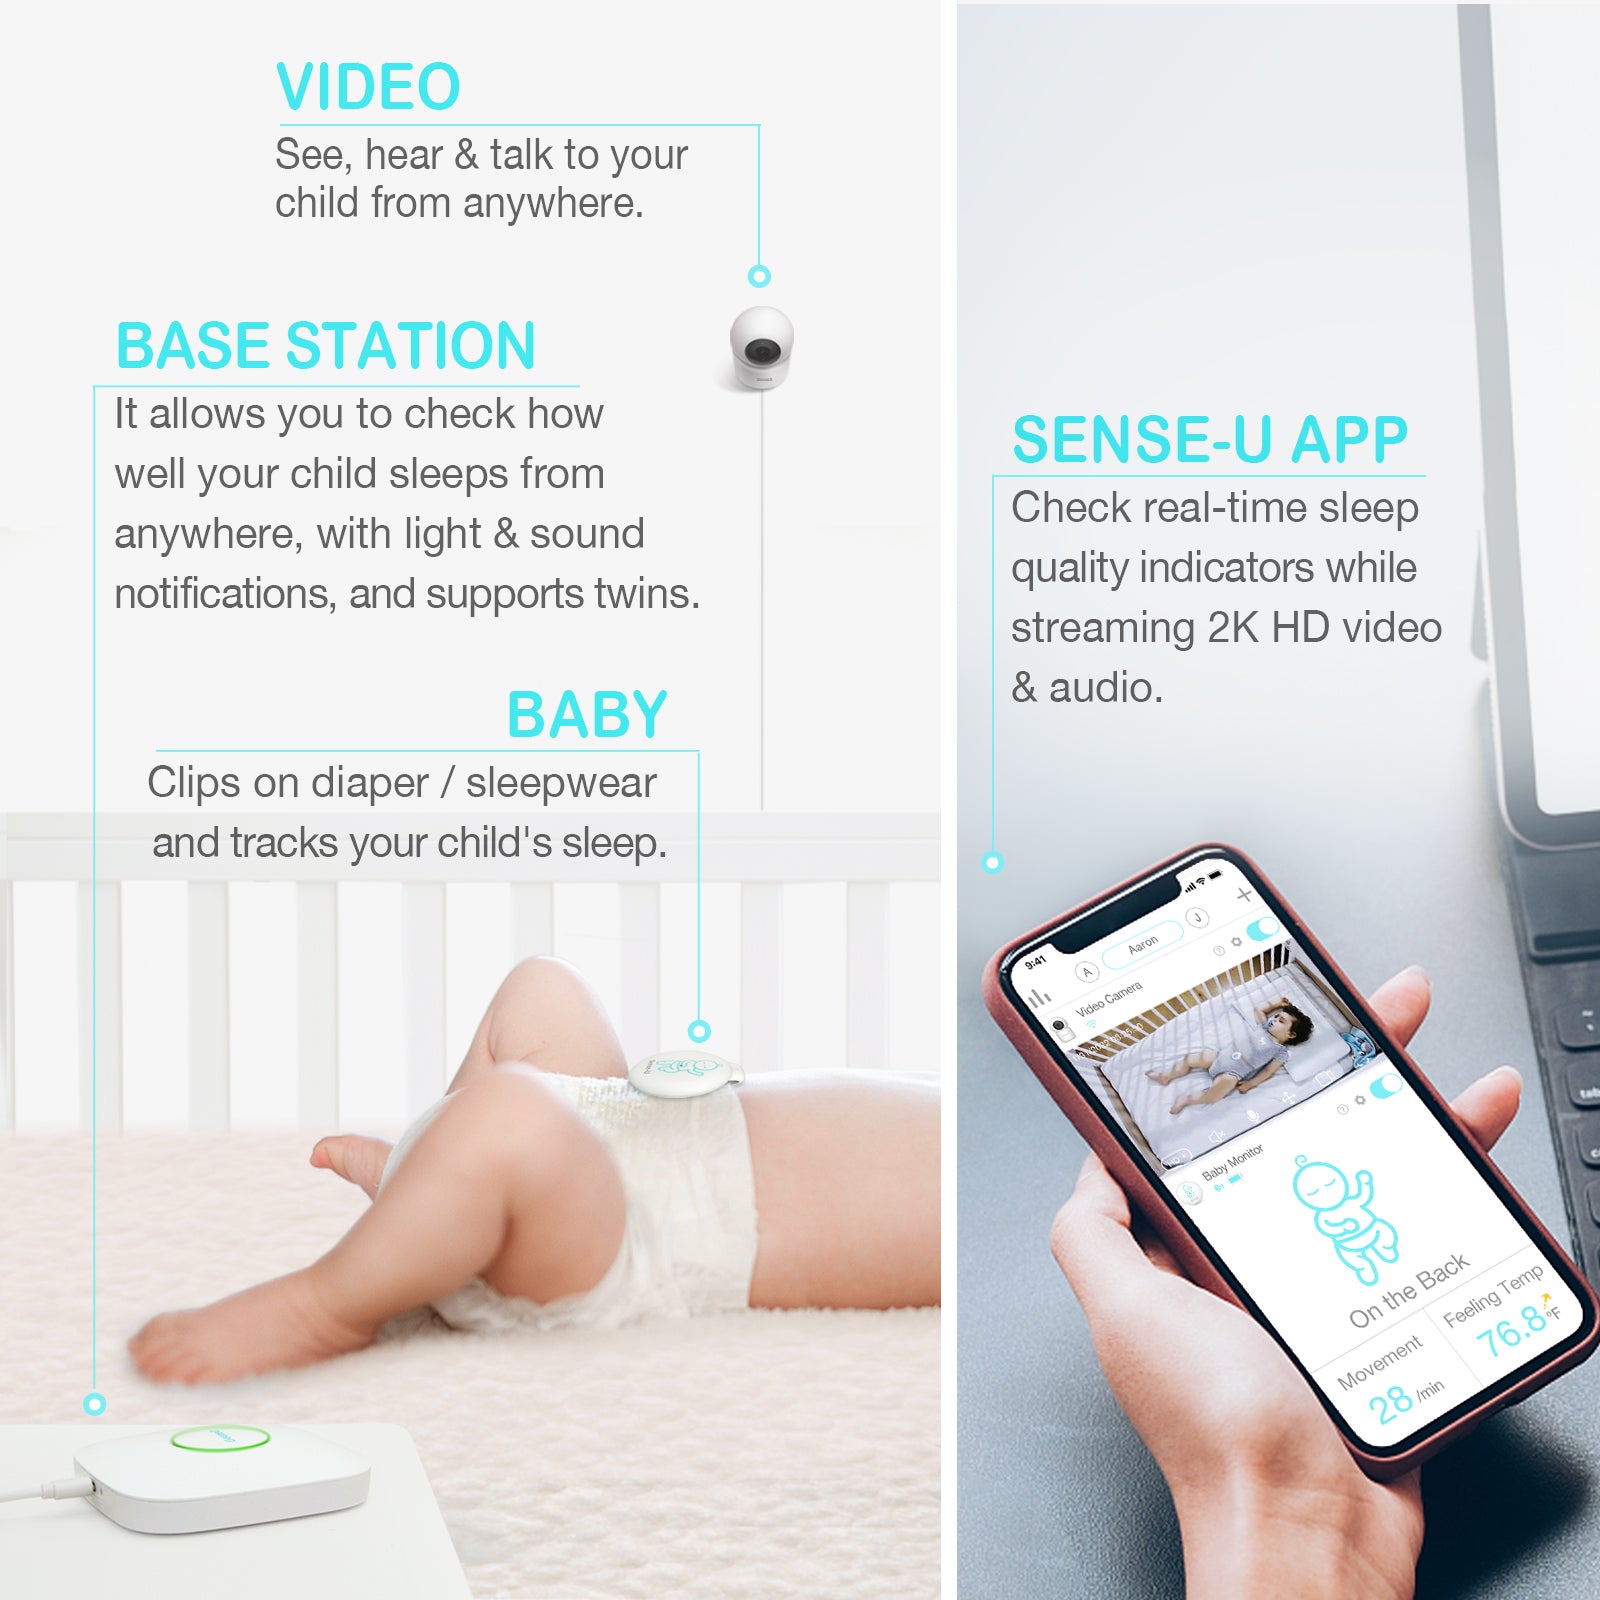 Sense-U Bundle: Know your child is okay while streaming HD video 